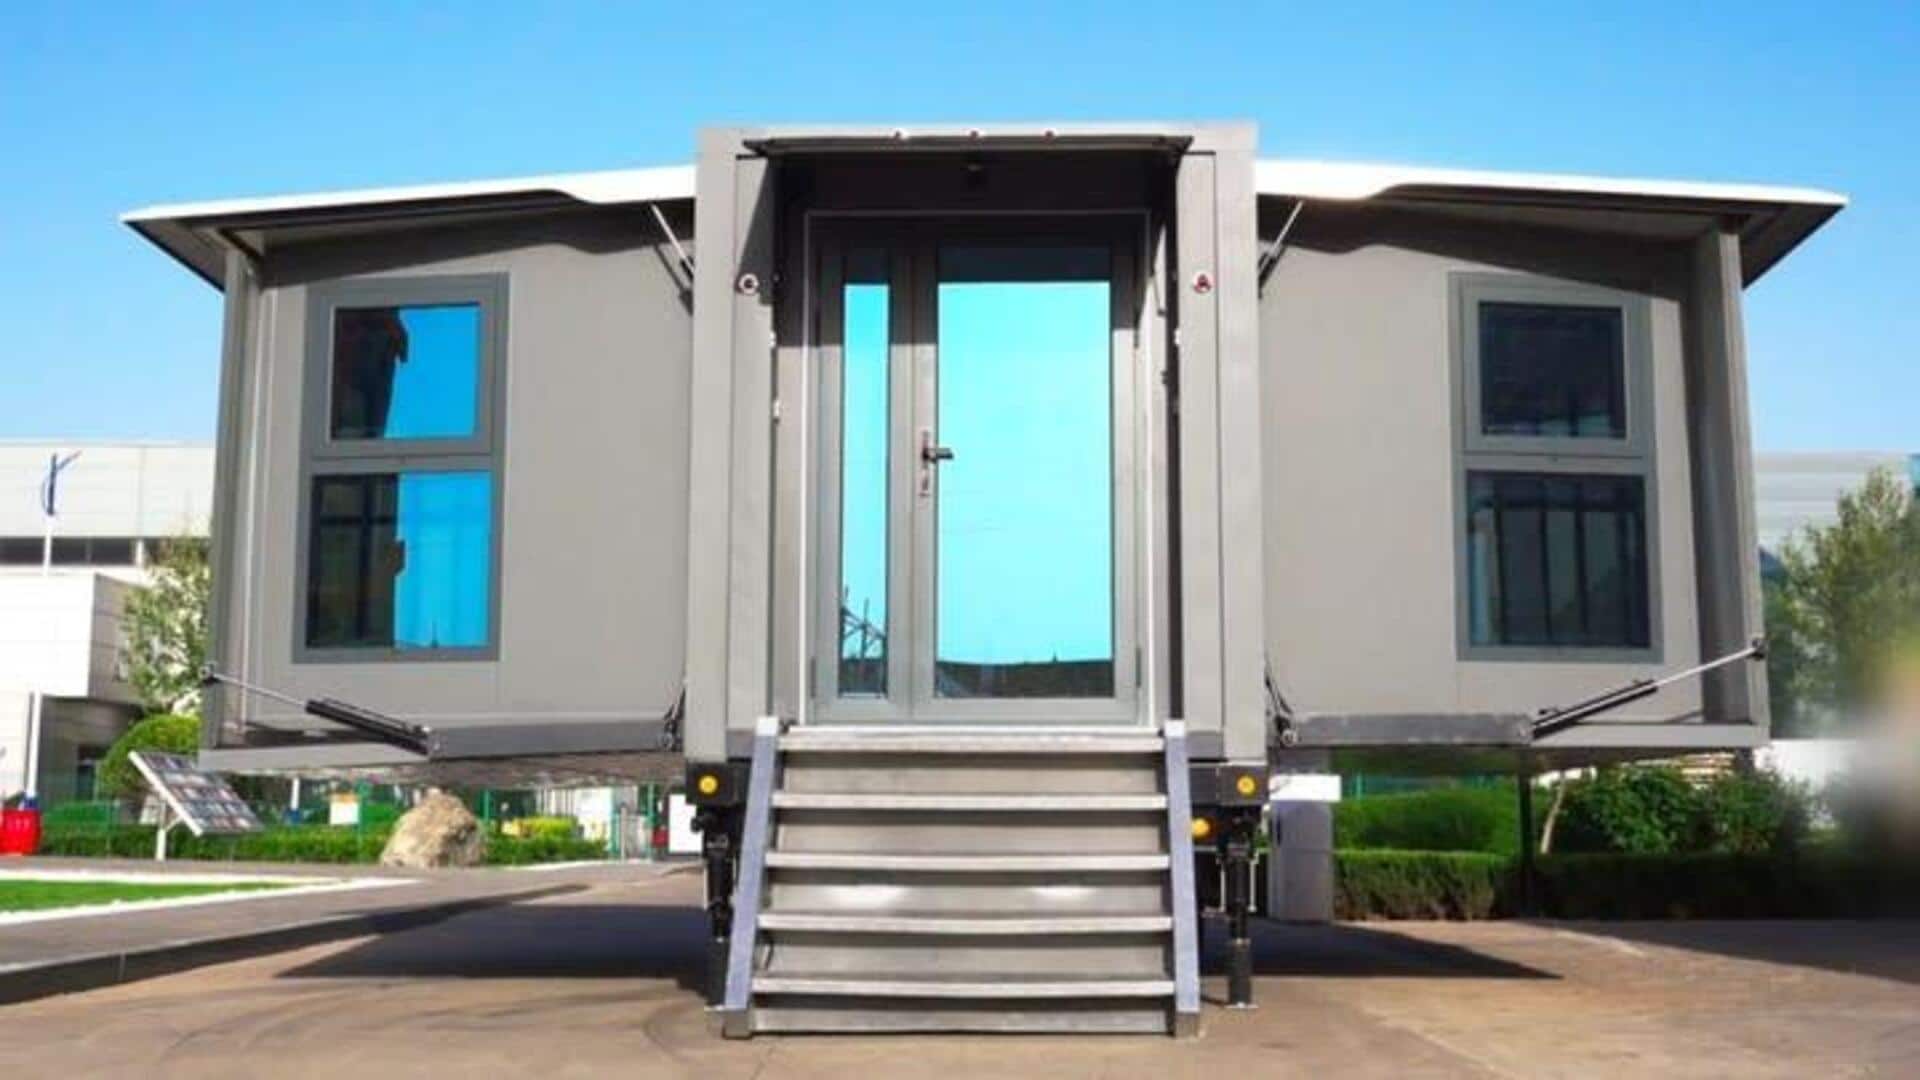 With a button press, this house becomes a transport-ready box